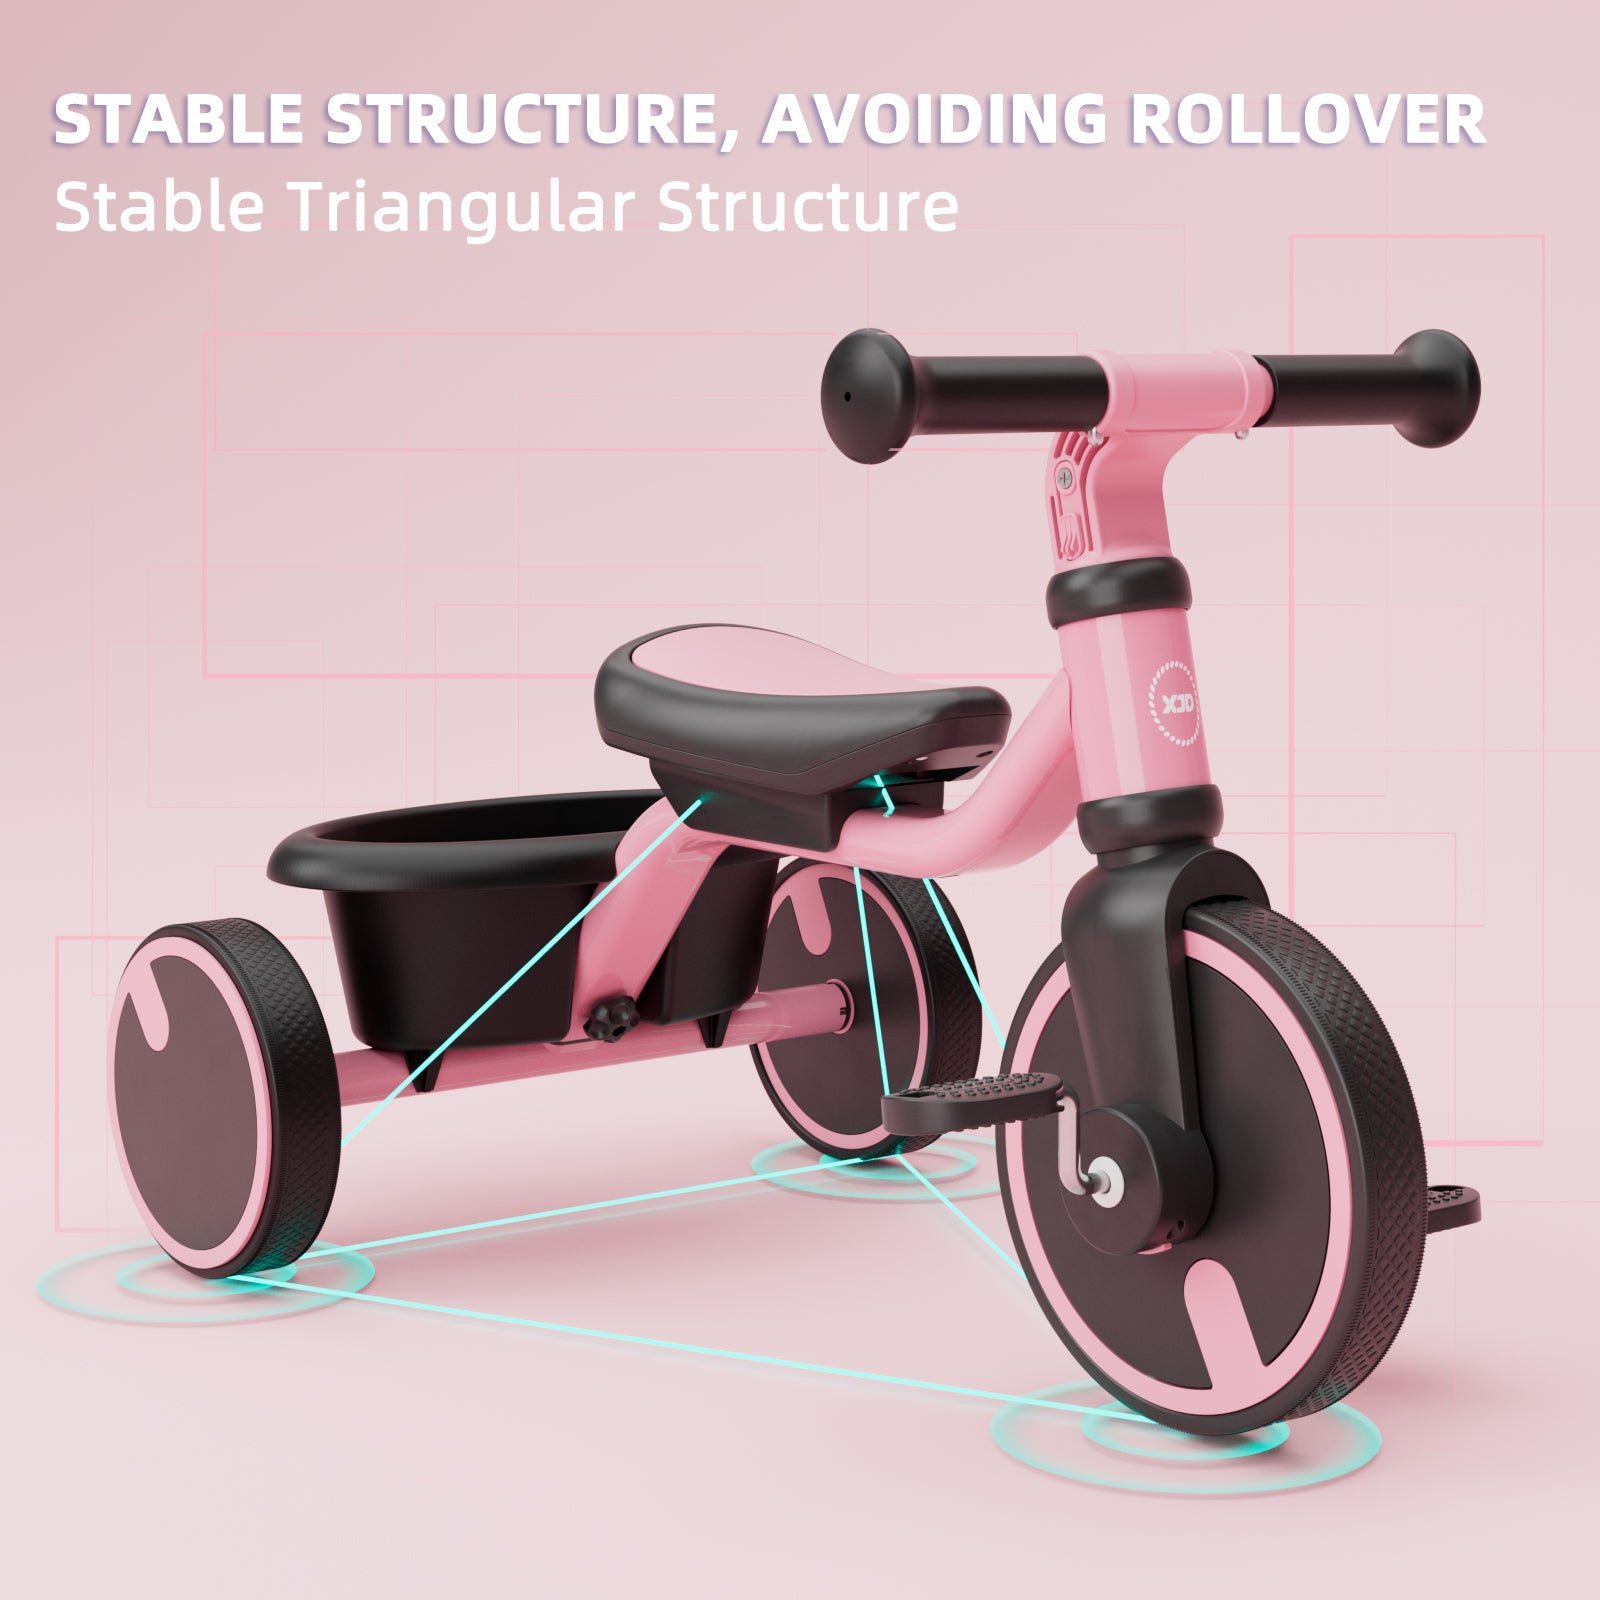 XJD Toddler Training  Balance Bike - No Pedal Bicycle for Kids Ages 1.5+, Pink